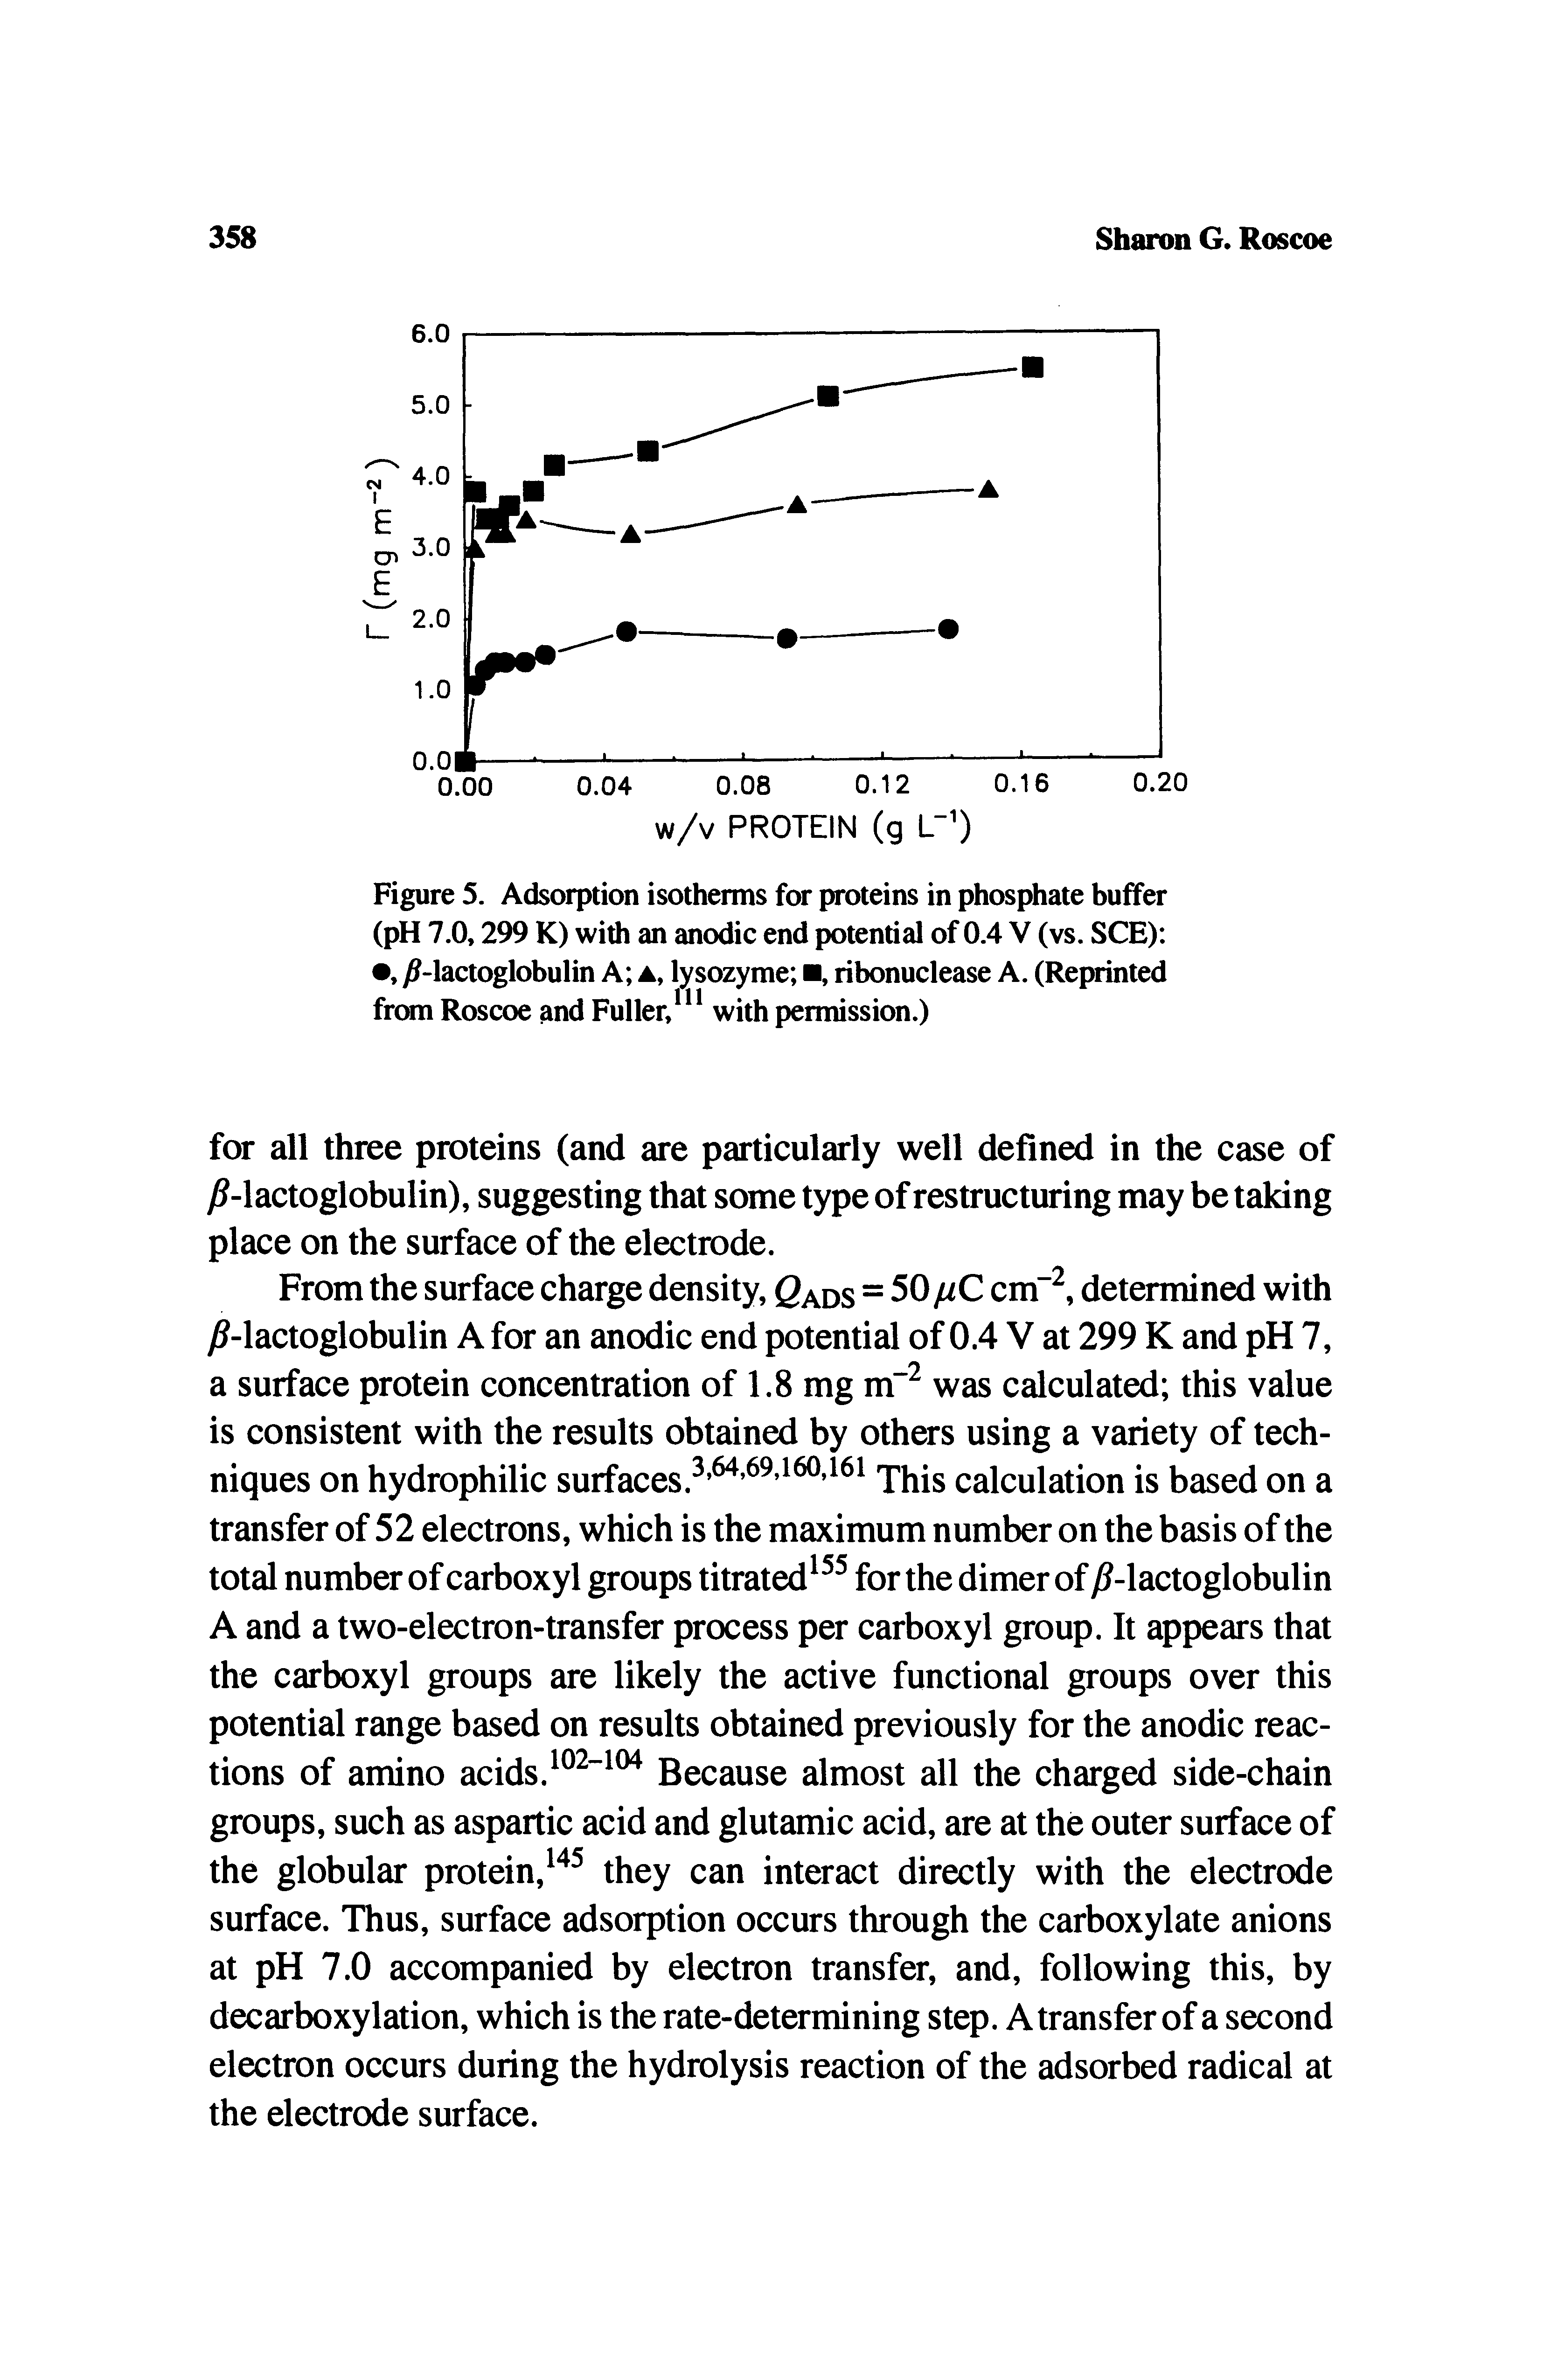 Figure 5. Adsorption isotherms for proteins in phosphate buffer (pH 7.0,299 K) with an anodic end potential of 0.4 V (vs. SCE) , )9-lactoglobulin A a, lysozyme , ribonuclease A. (Reprinted from Roscoe and Fuller, with permission.)...